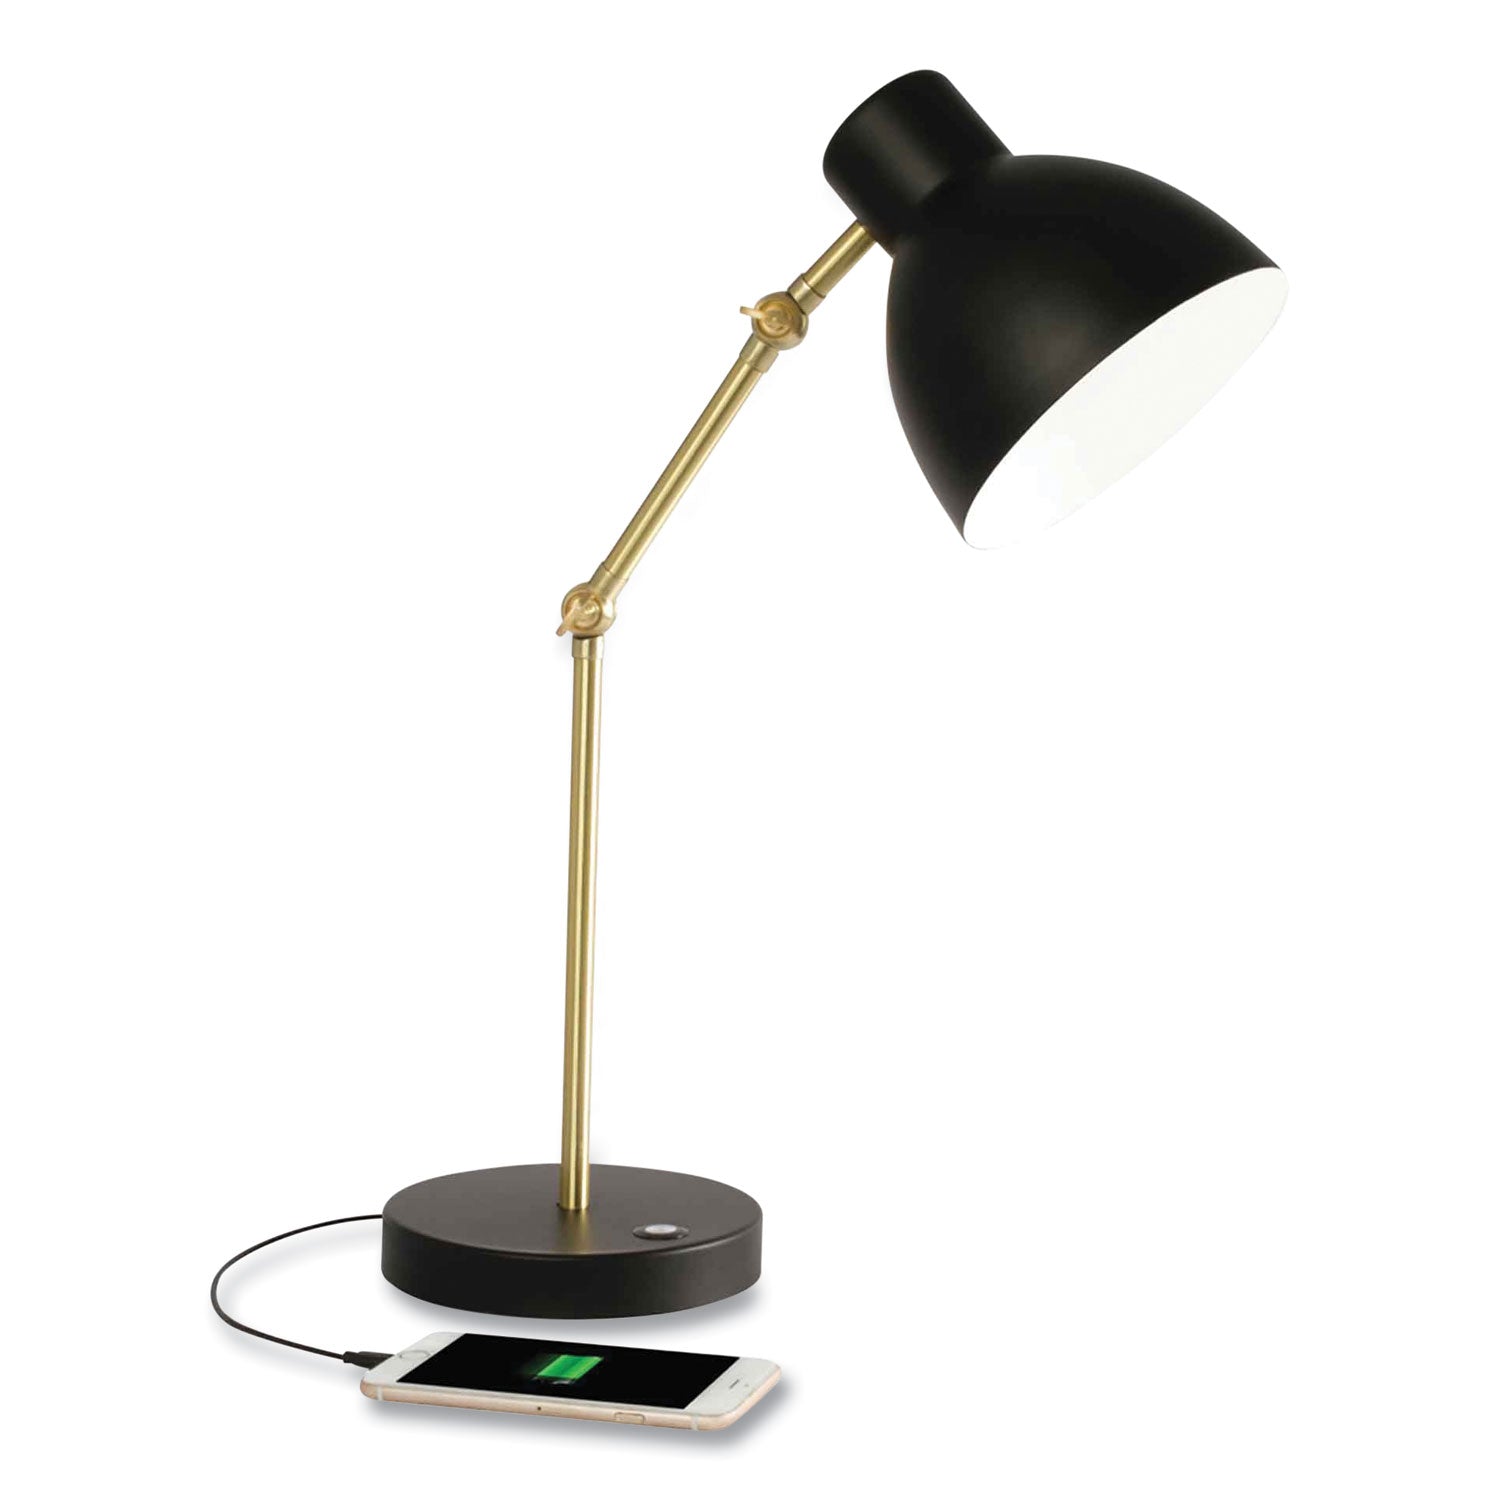 wellness-series-adapt-led-desk-lamp-7-to-22-high-black-ships-in-4-6-business-days_ottcs01b19shpr - 1